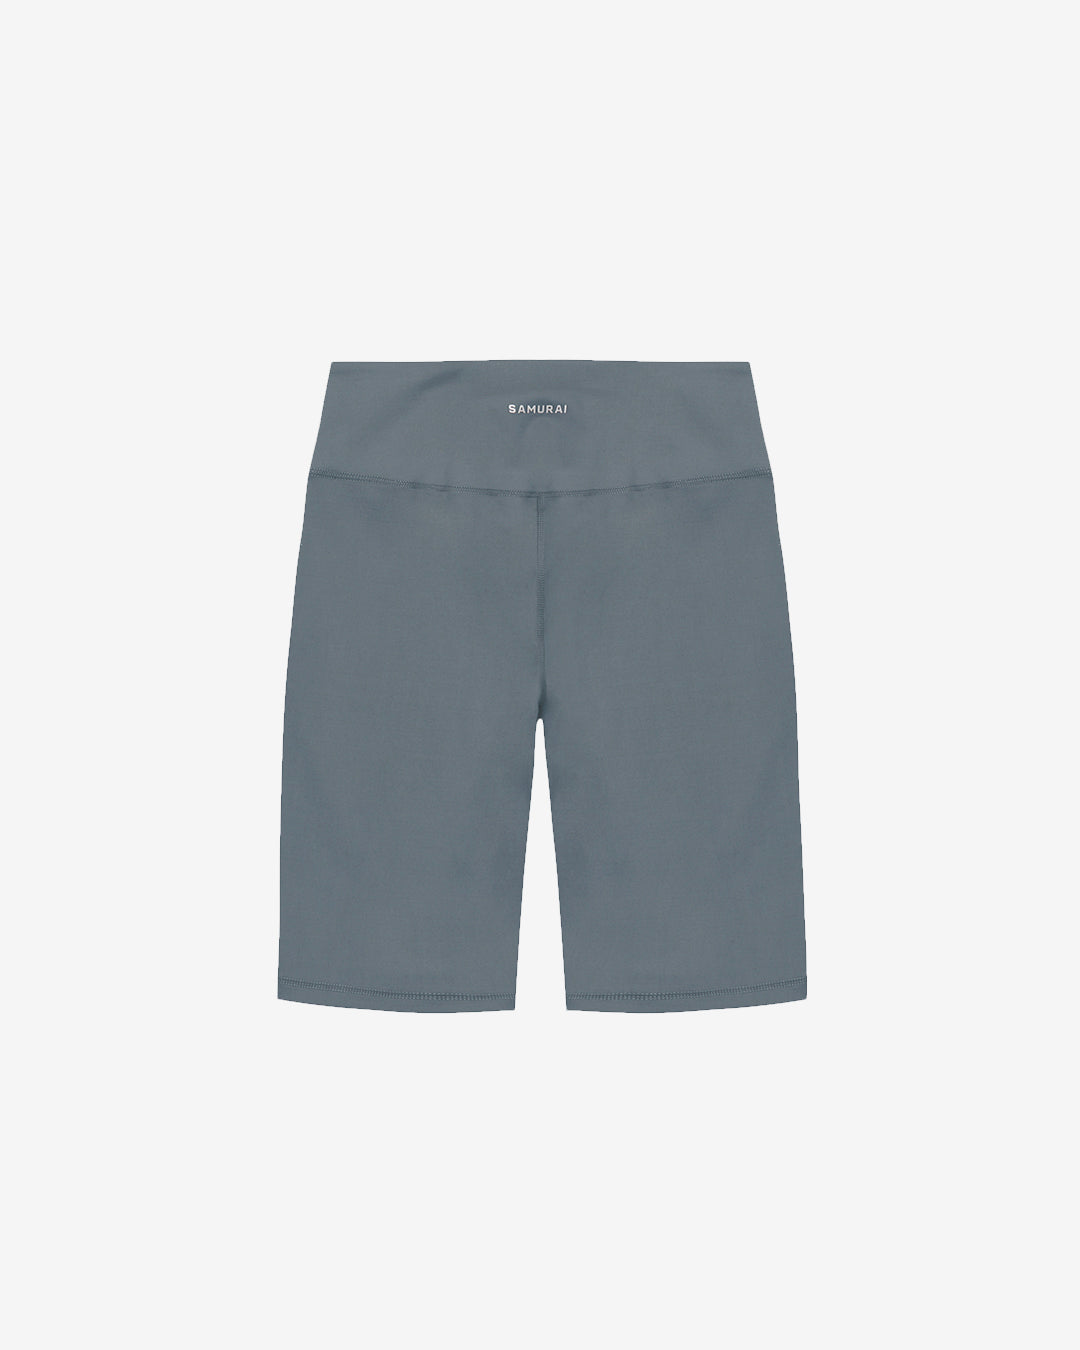 EE:WS04 - Cycling Shorts - Dusty Blue